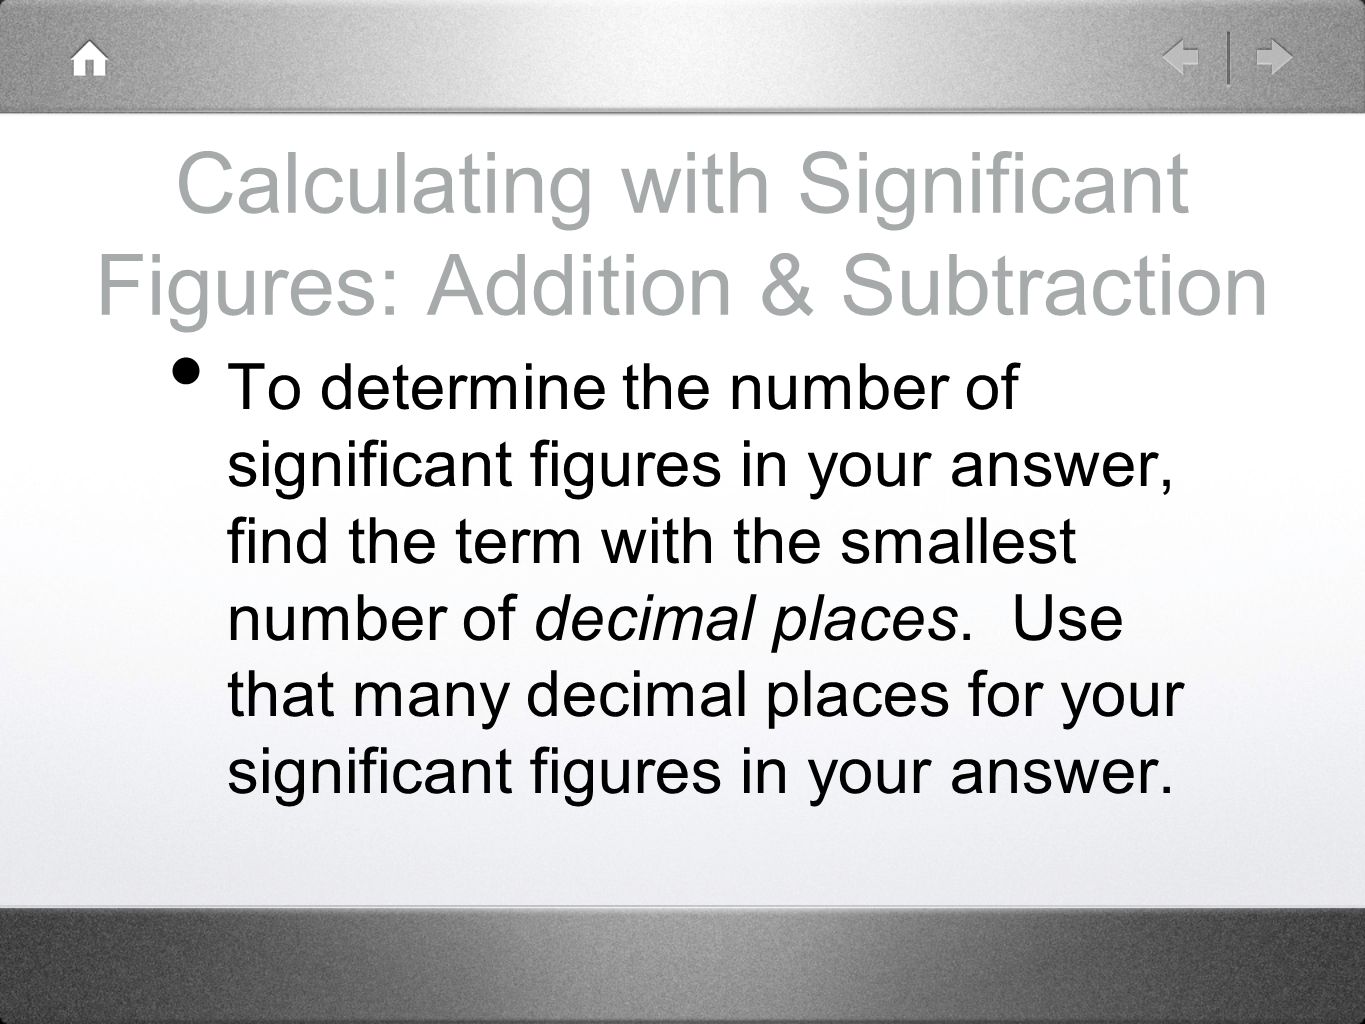 Calculating with Significant Figures: Addition & Subtraction